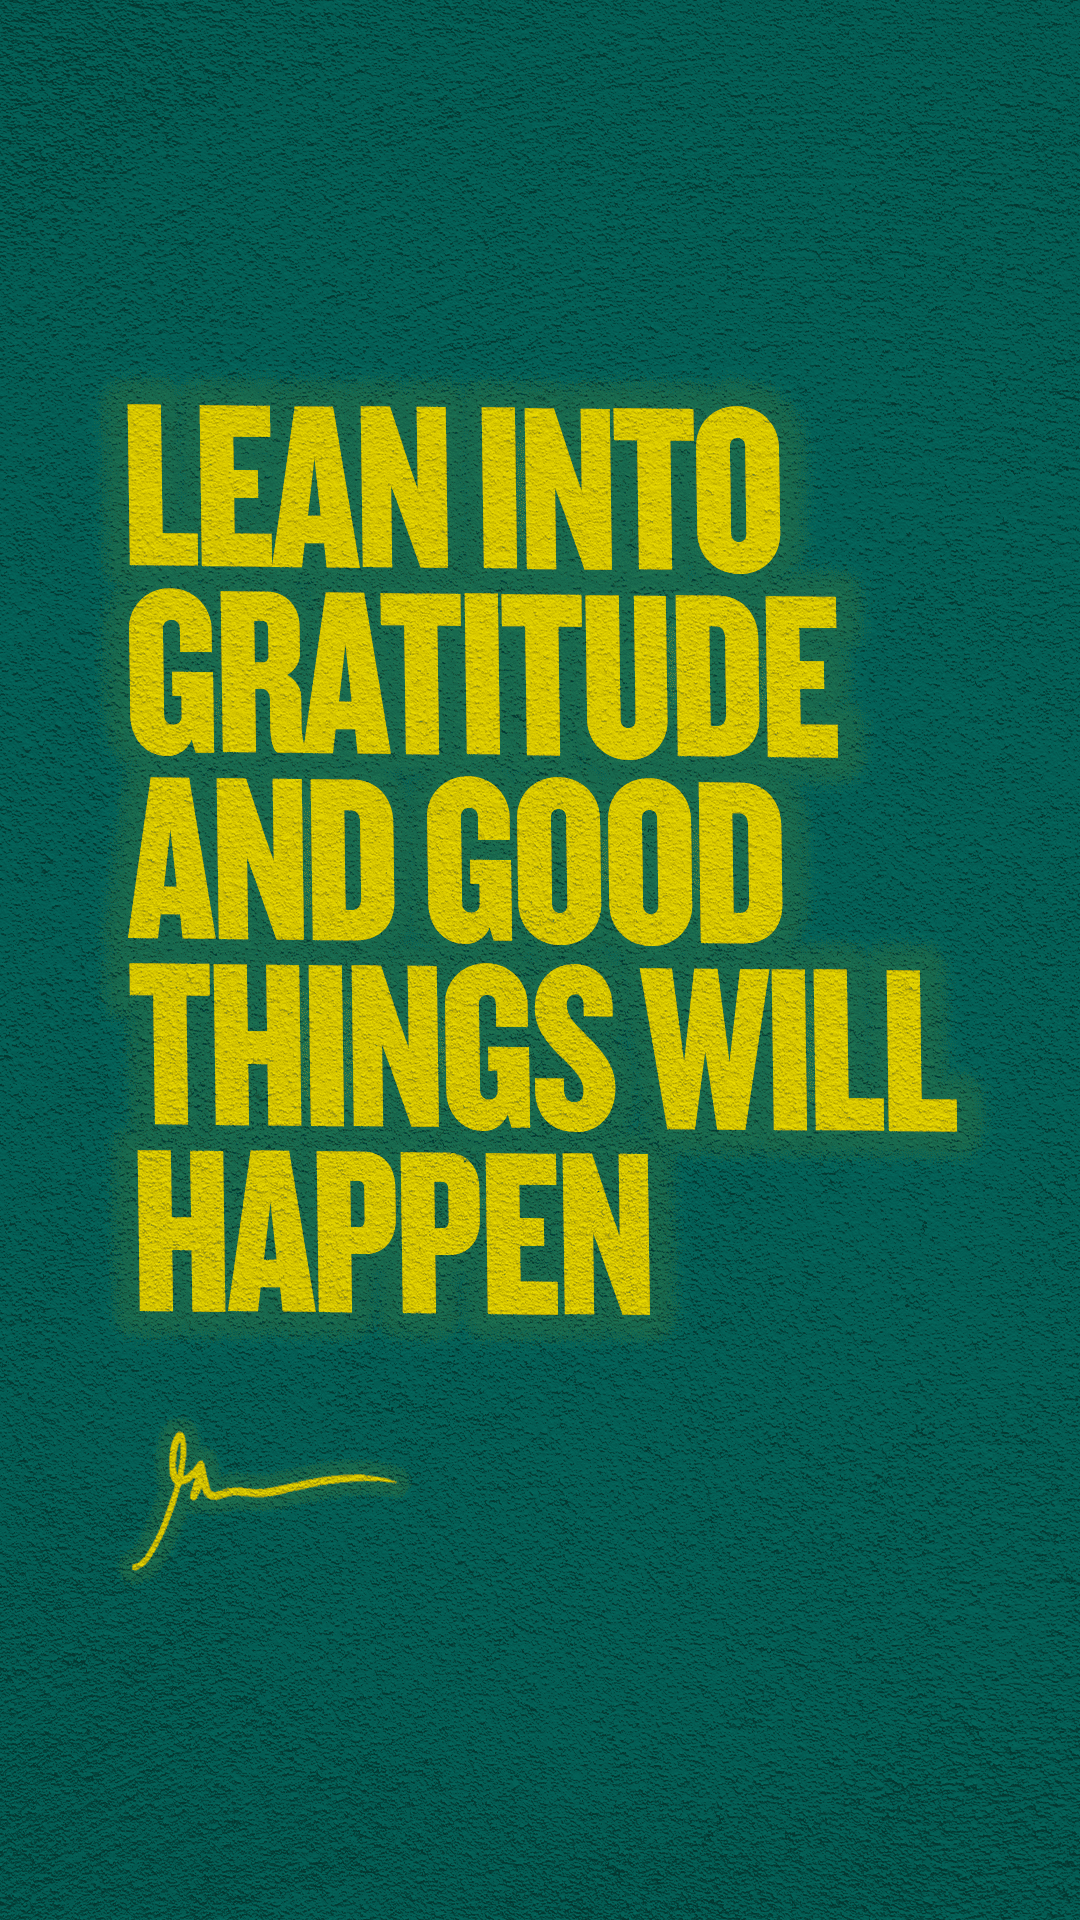 Lean into gratitude and good things will happen.